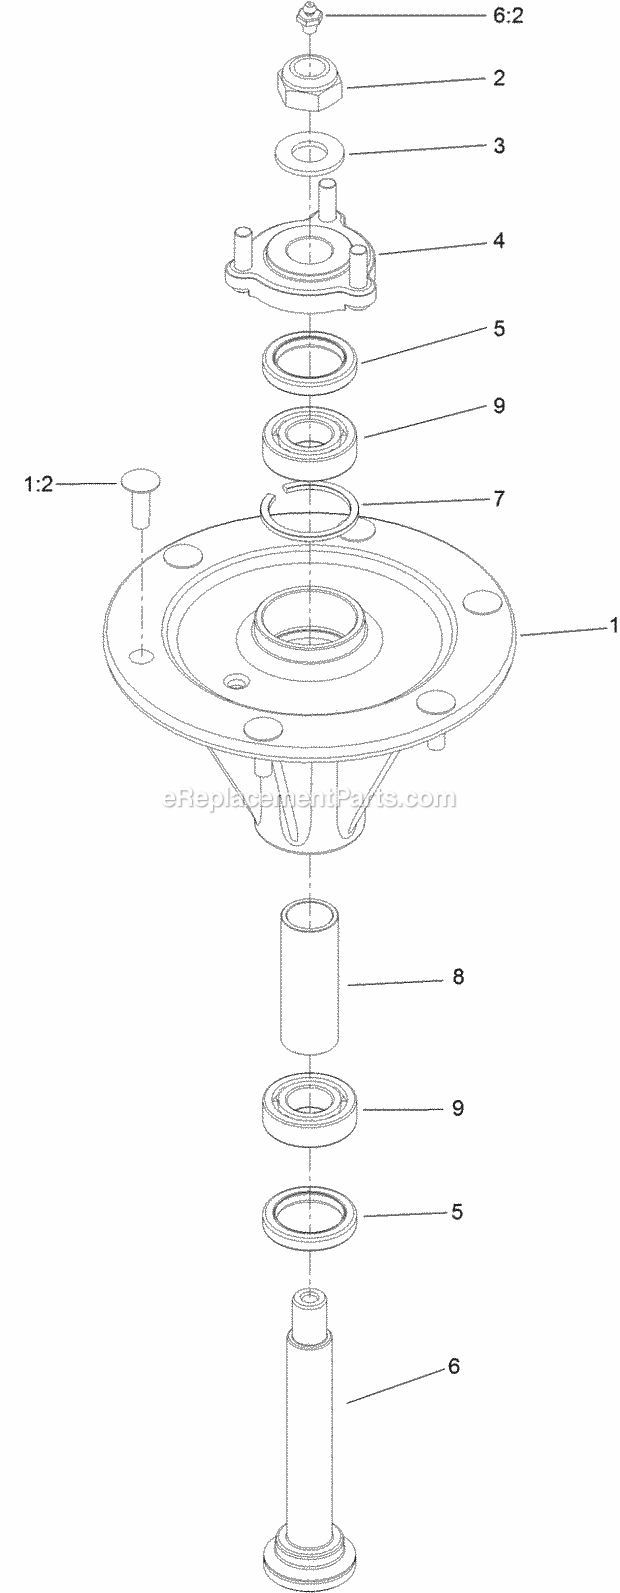 Toro 74942TE (316000001-316999999) Z Master Professional 6000 Series Riding Mower, With 152cm Turbo Force Rear Discharge Mower, Spindle Assembly No. 125-9324 Diagram